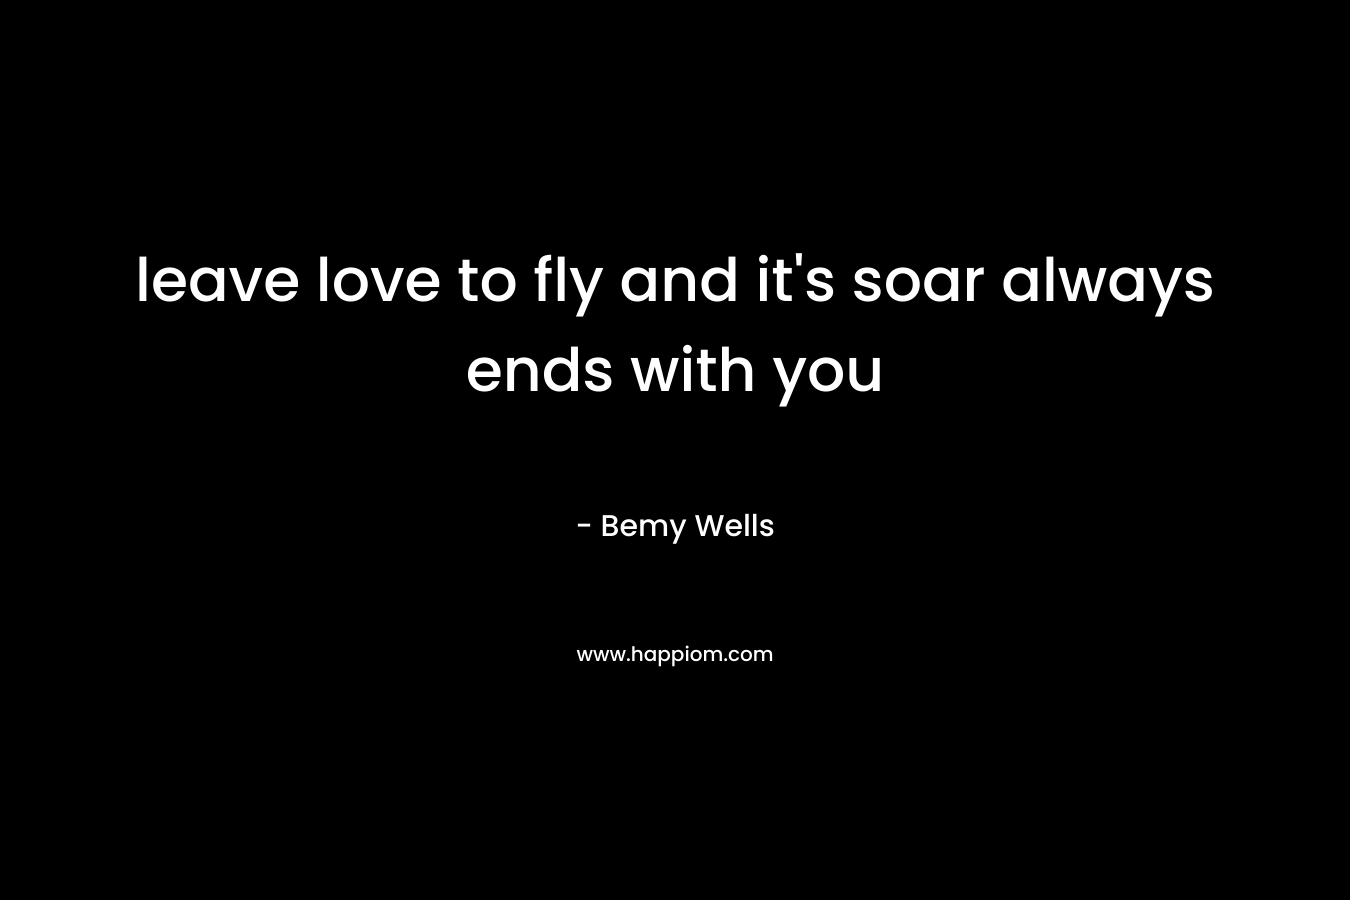 leave love to fly and it's soar always ends with you